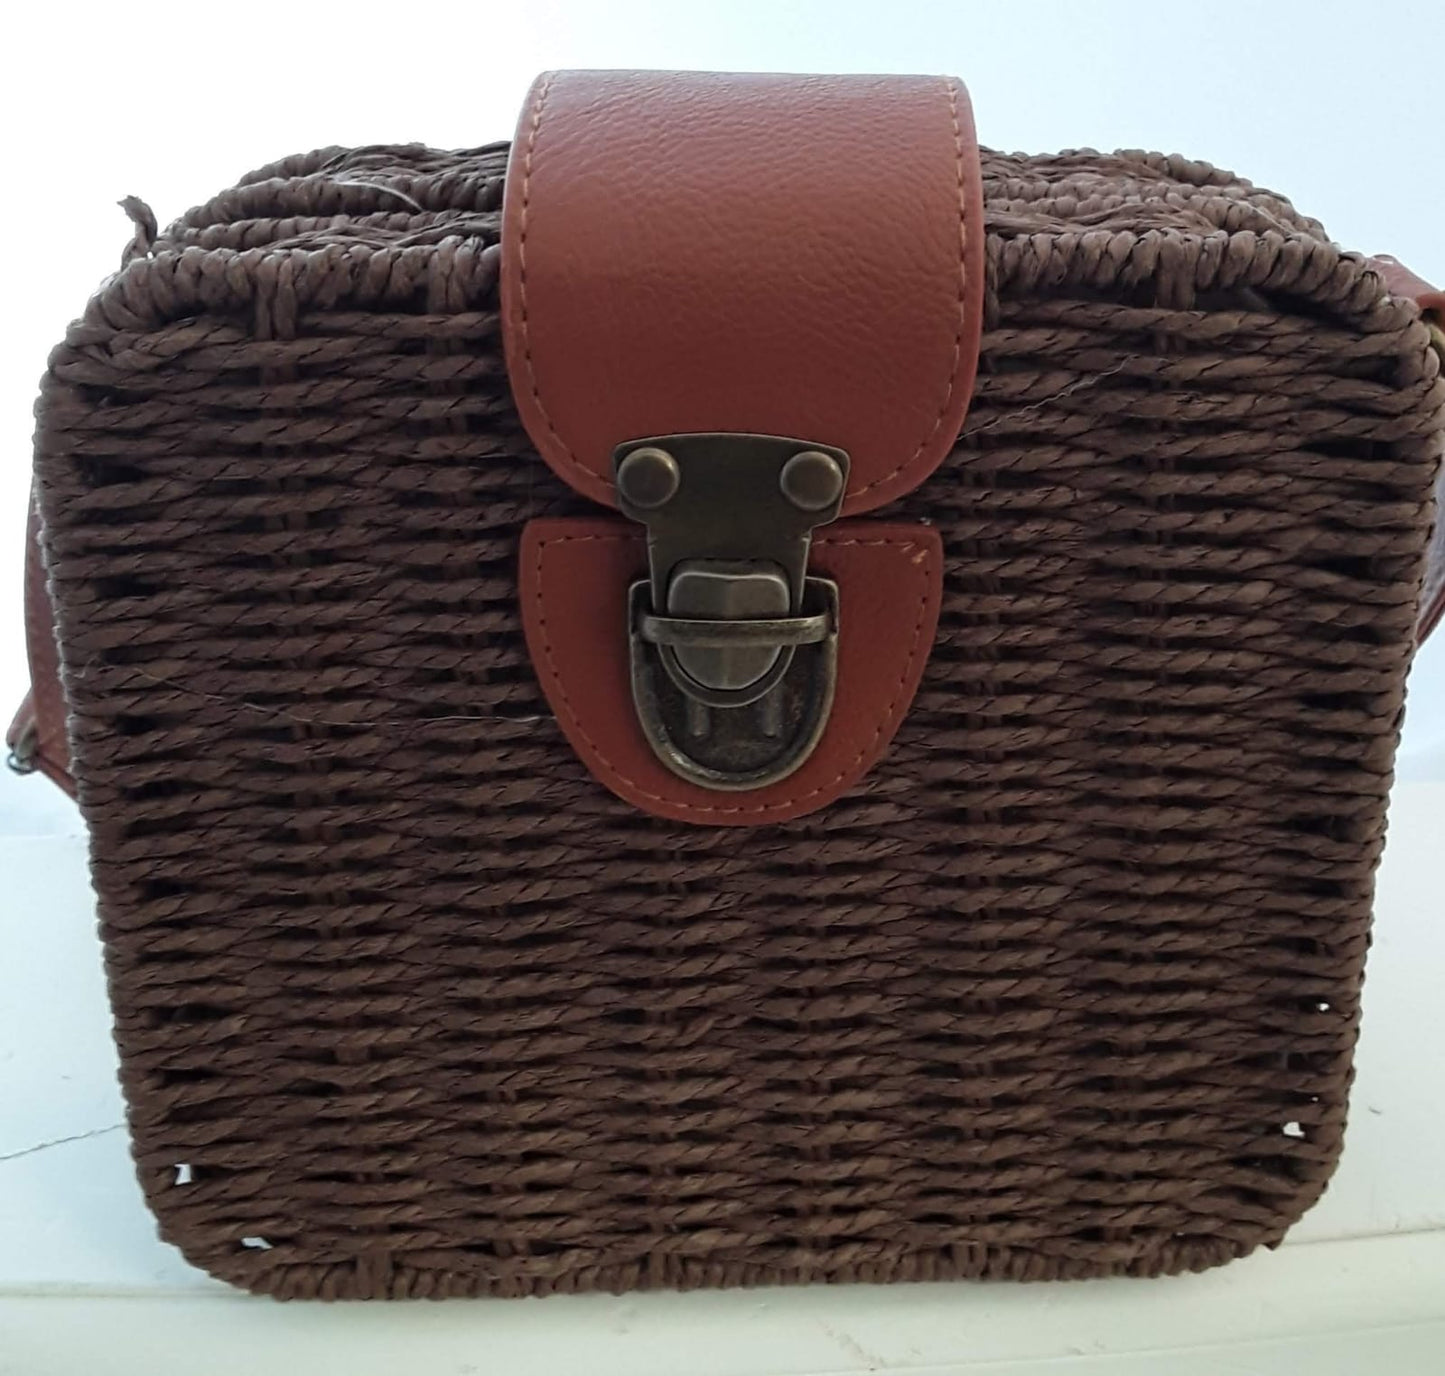 Sienna Straw Hand Bag with Leather Straps